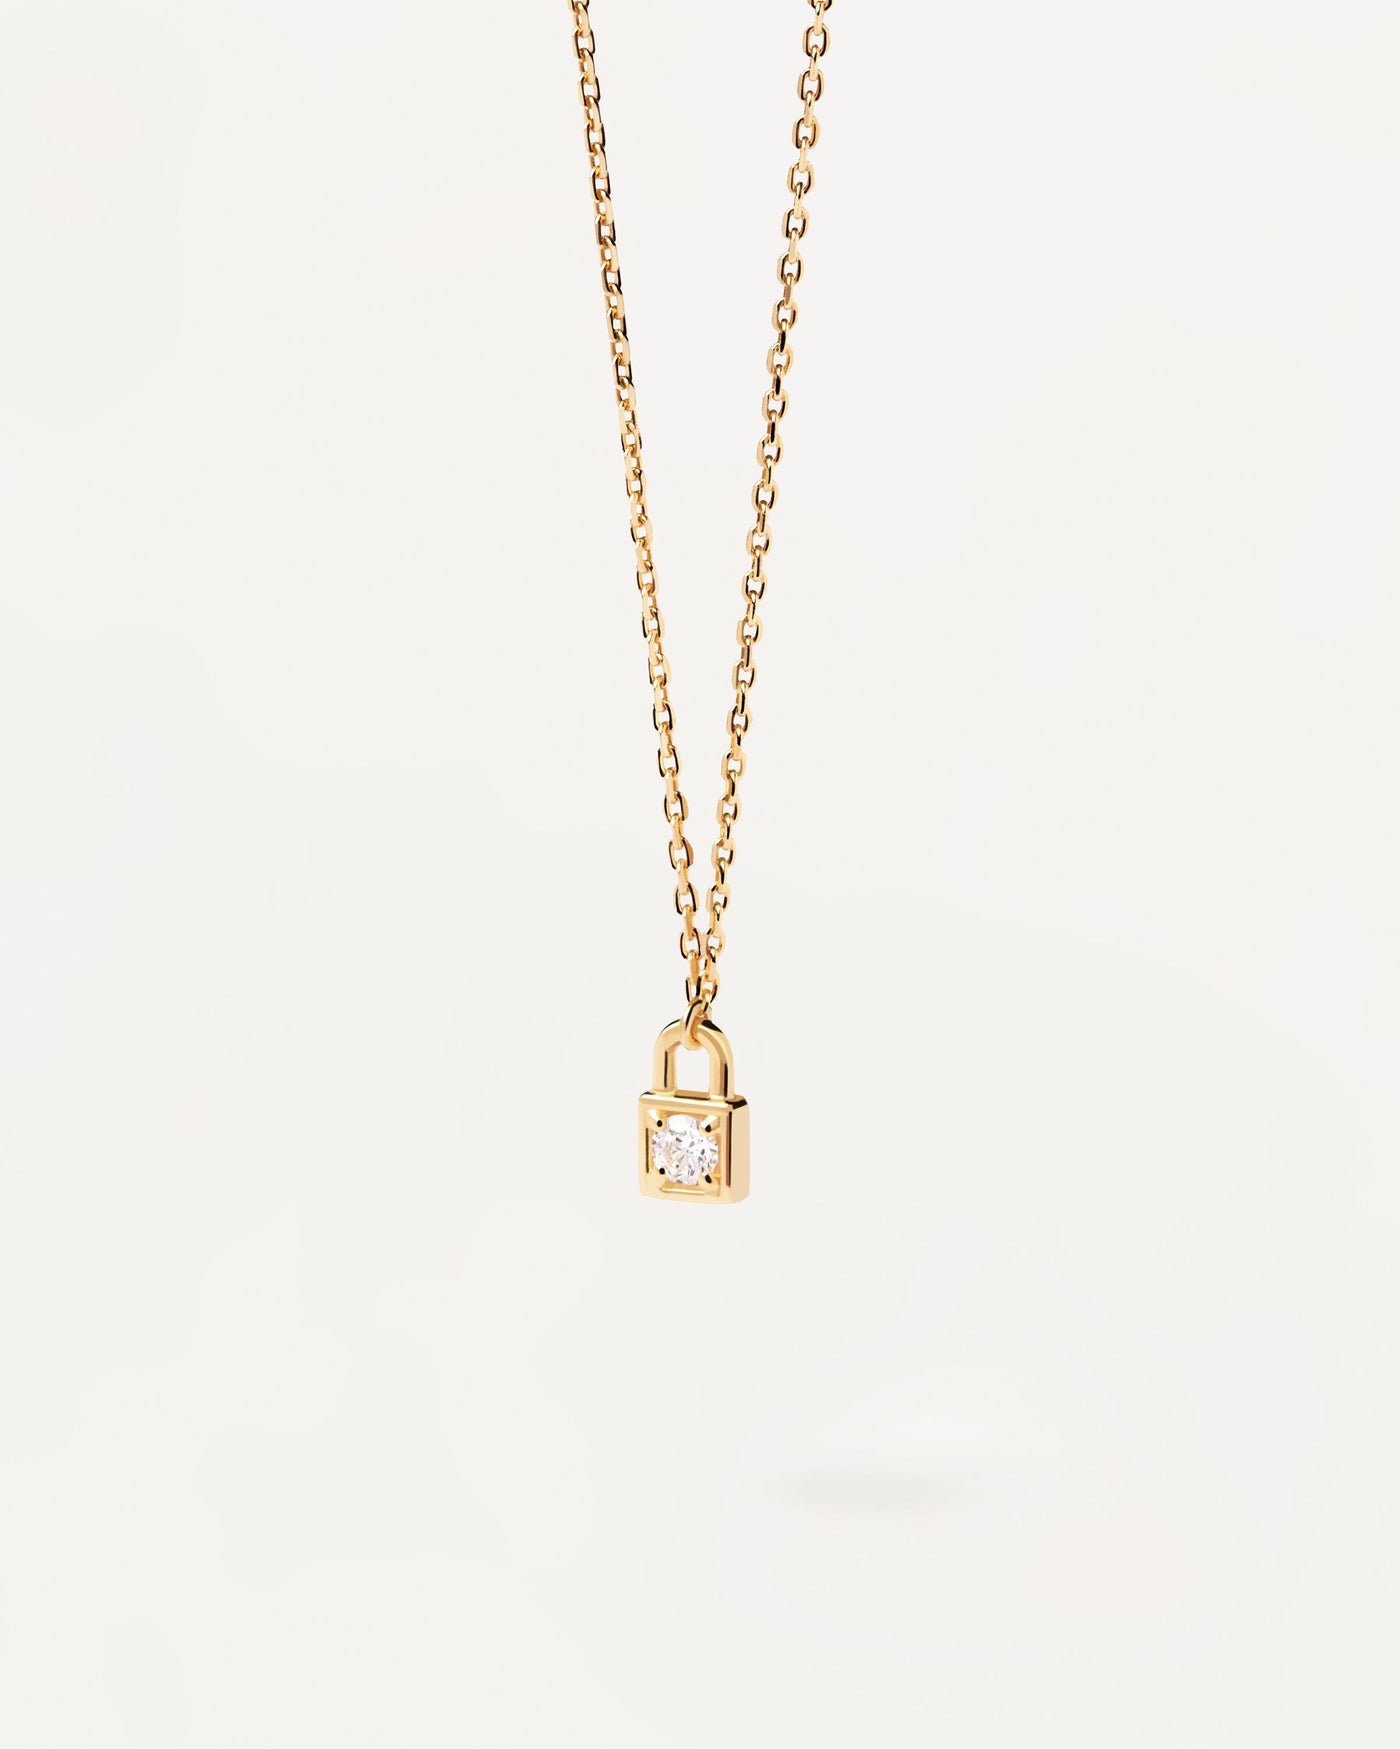 2023 Selection | Padlock Necklace. Gold-plated necklace with padlock pendant and white zirconia. Get the latest arrival from PDPAOLA. Place your order safely and get this Best Seller. Free Shipping.